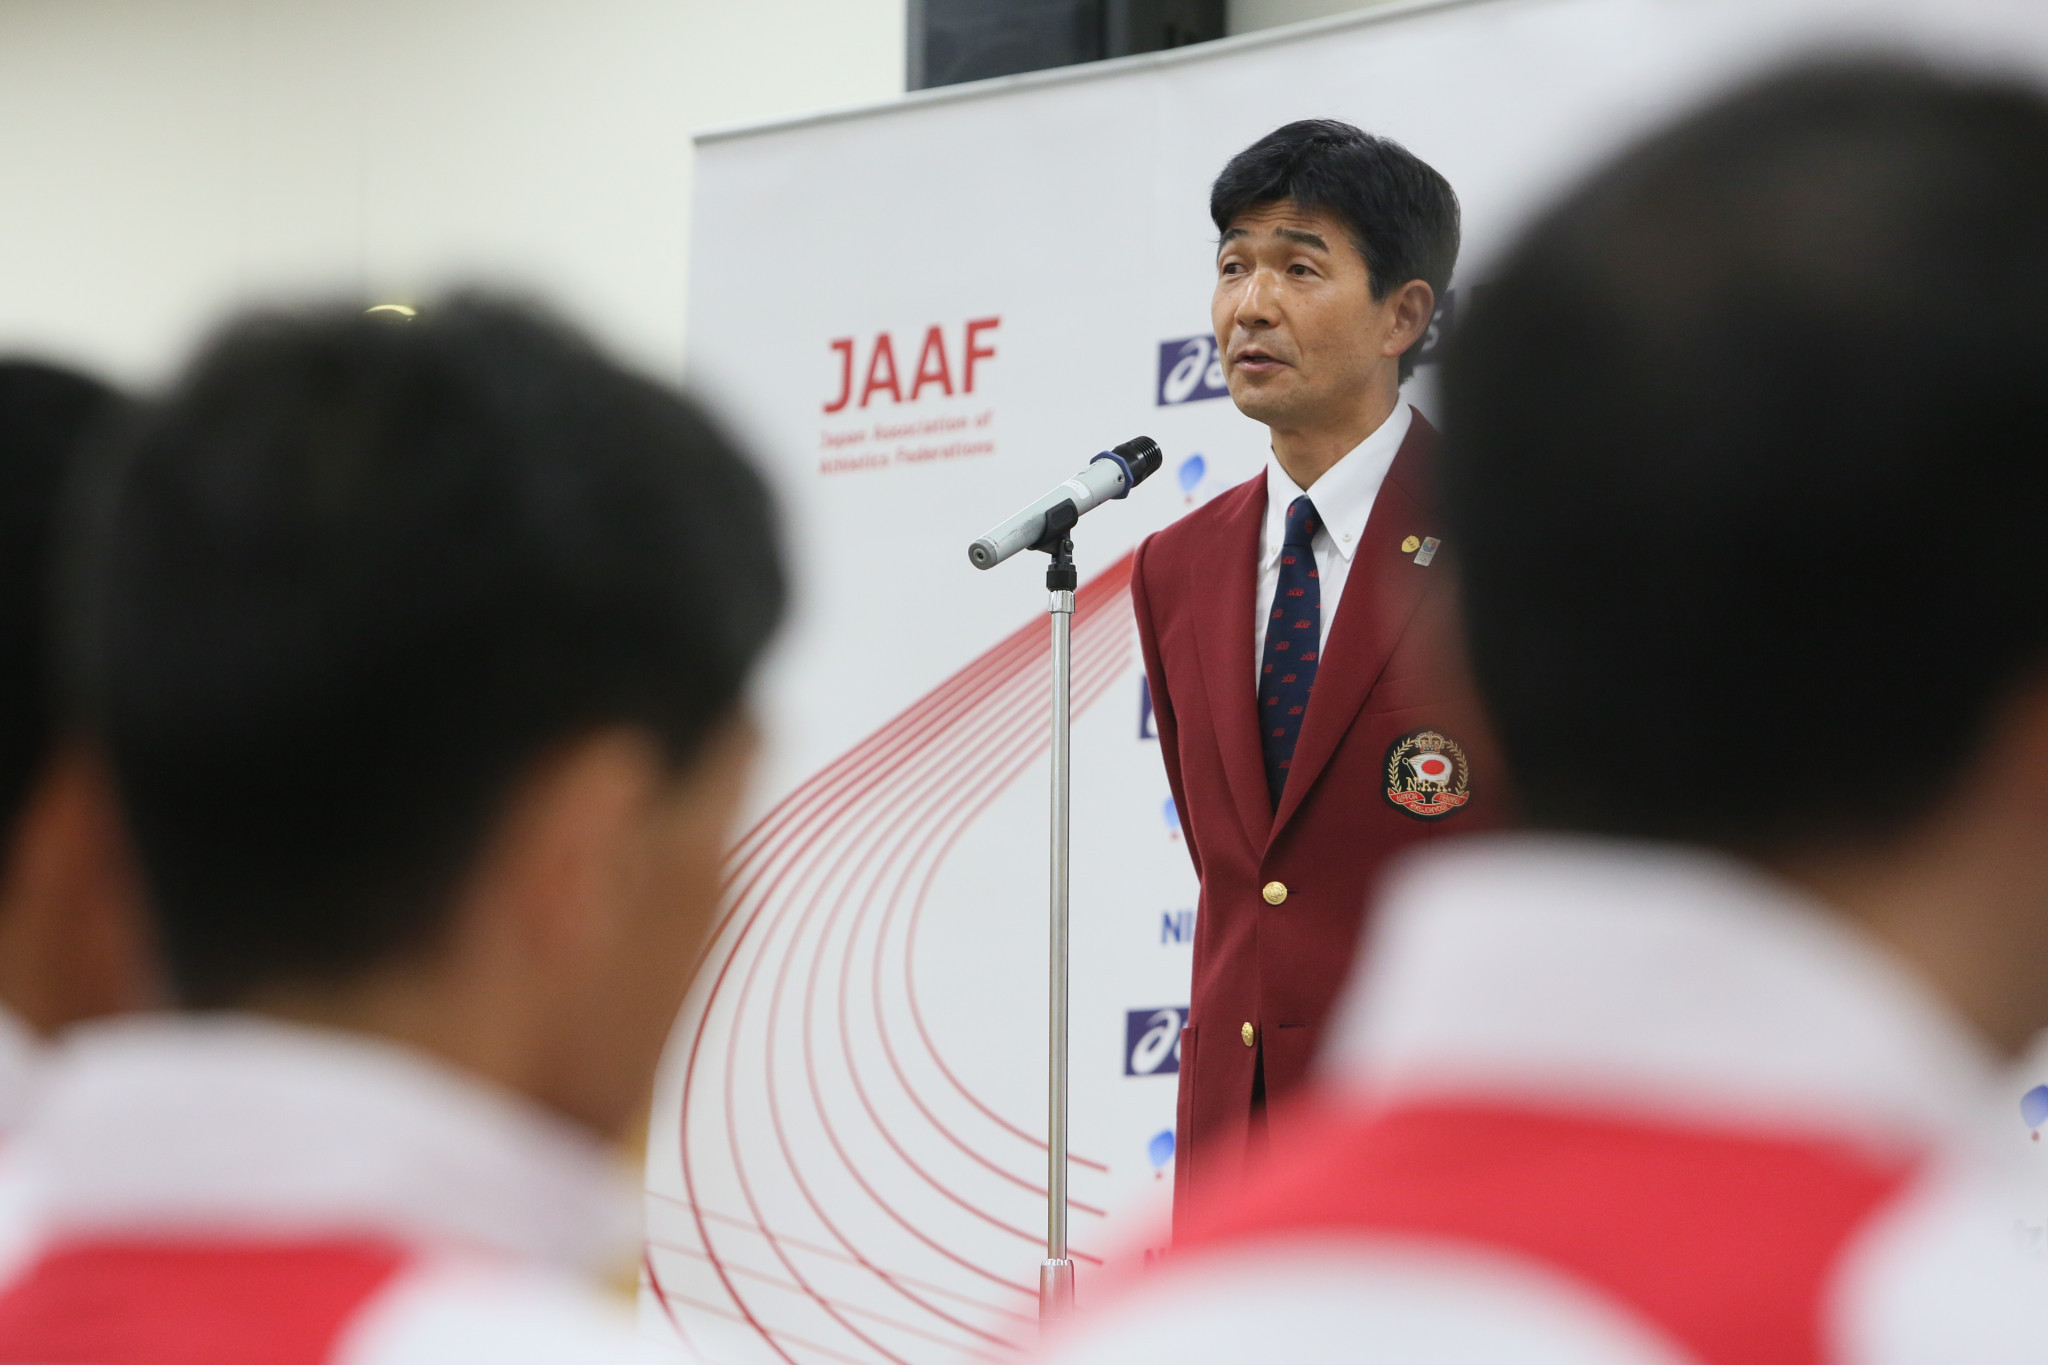 Mitsugi Ogata, senior managing director of the Japan Association of Athletics Federations, has been named as Japan's Deputy Chef de Mission for the Tokyo 2020 Olympics ©Getty Images